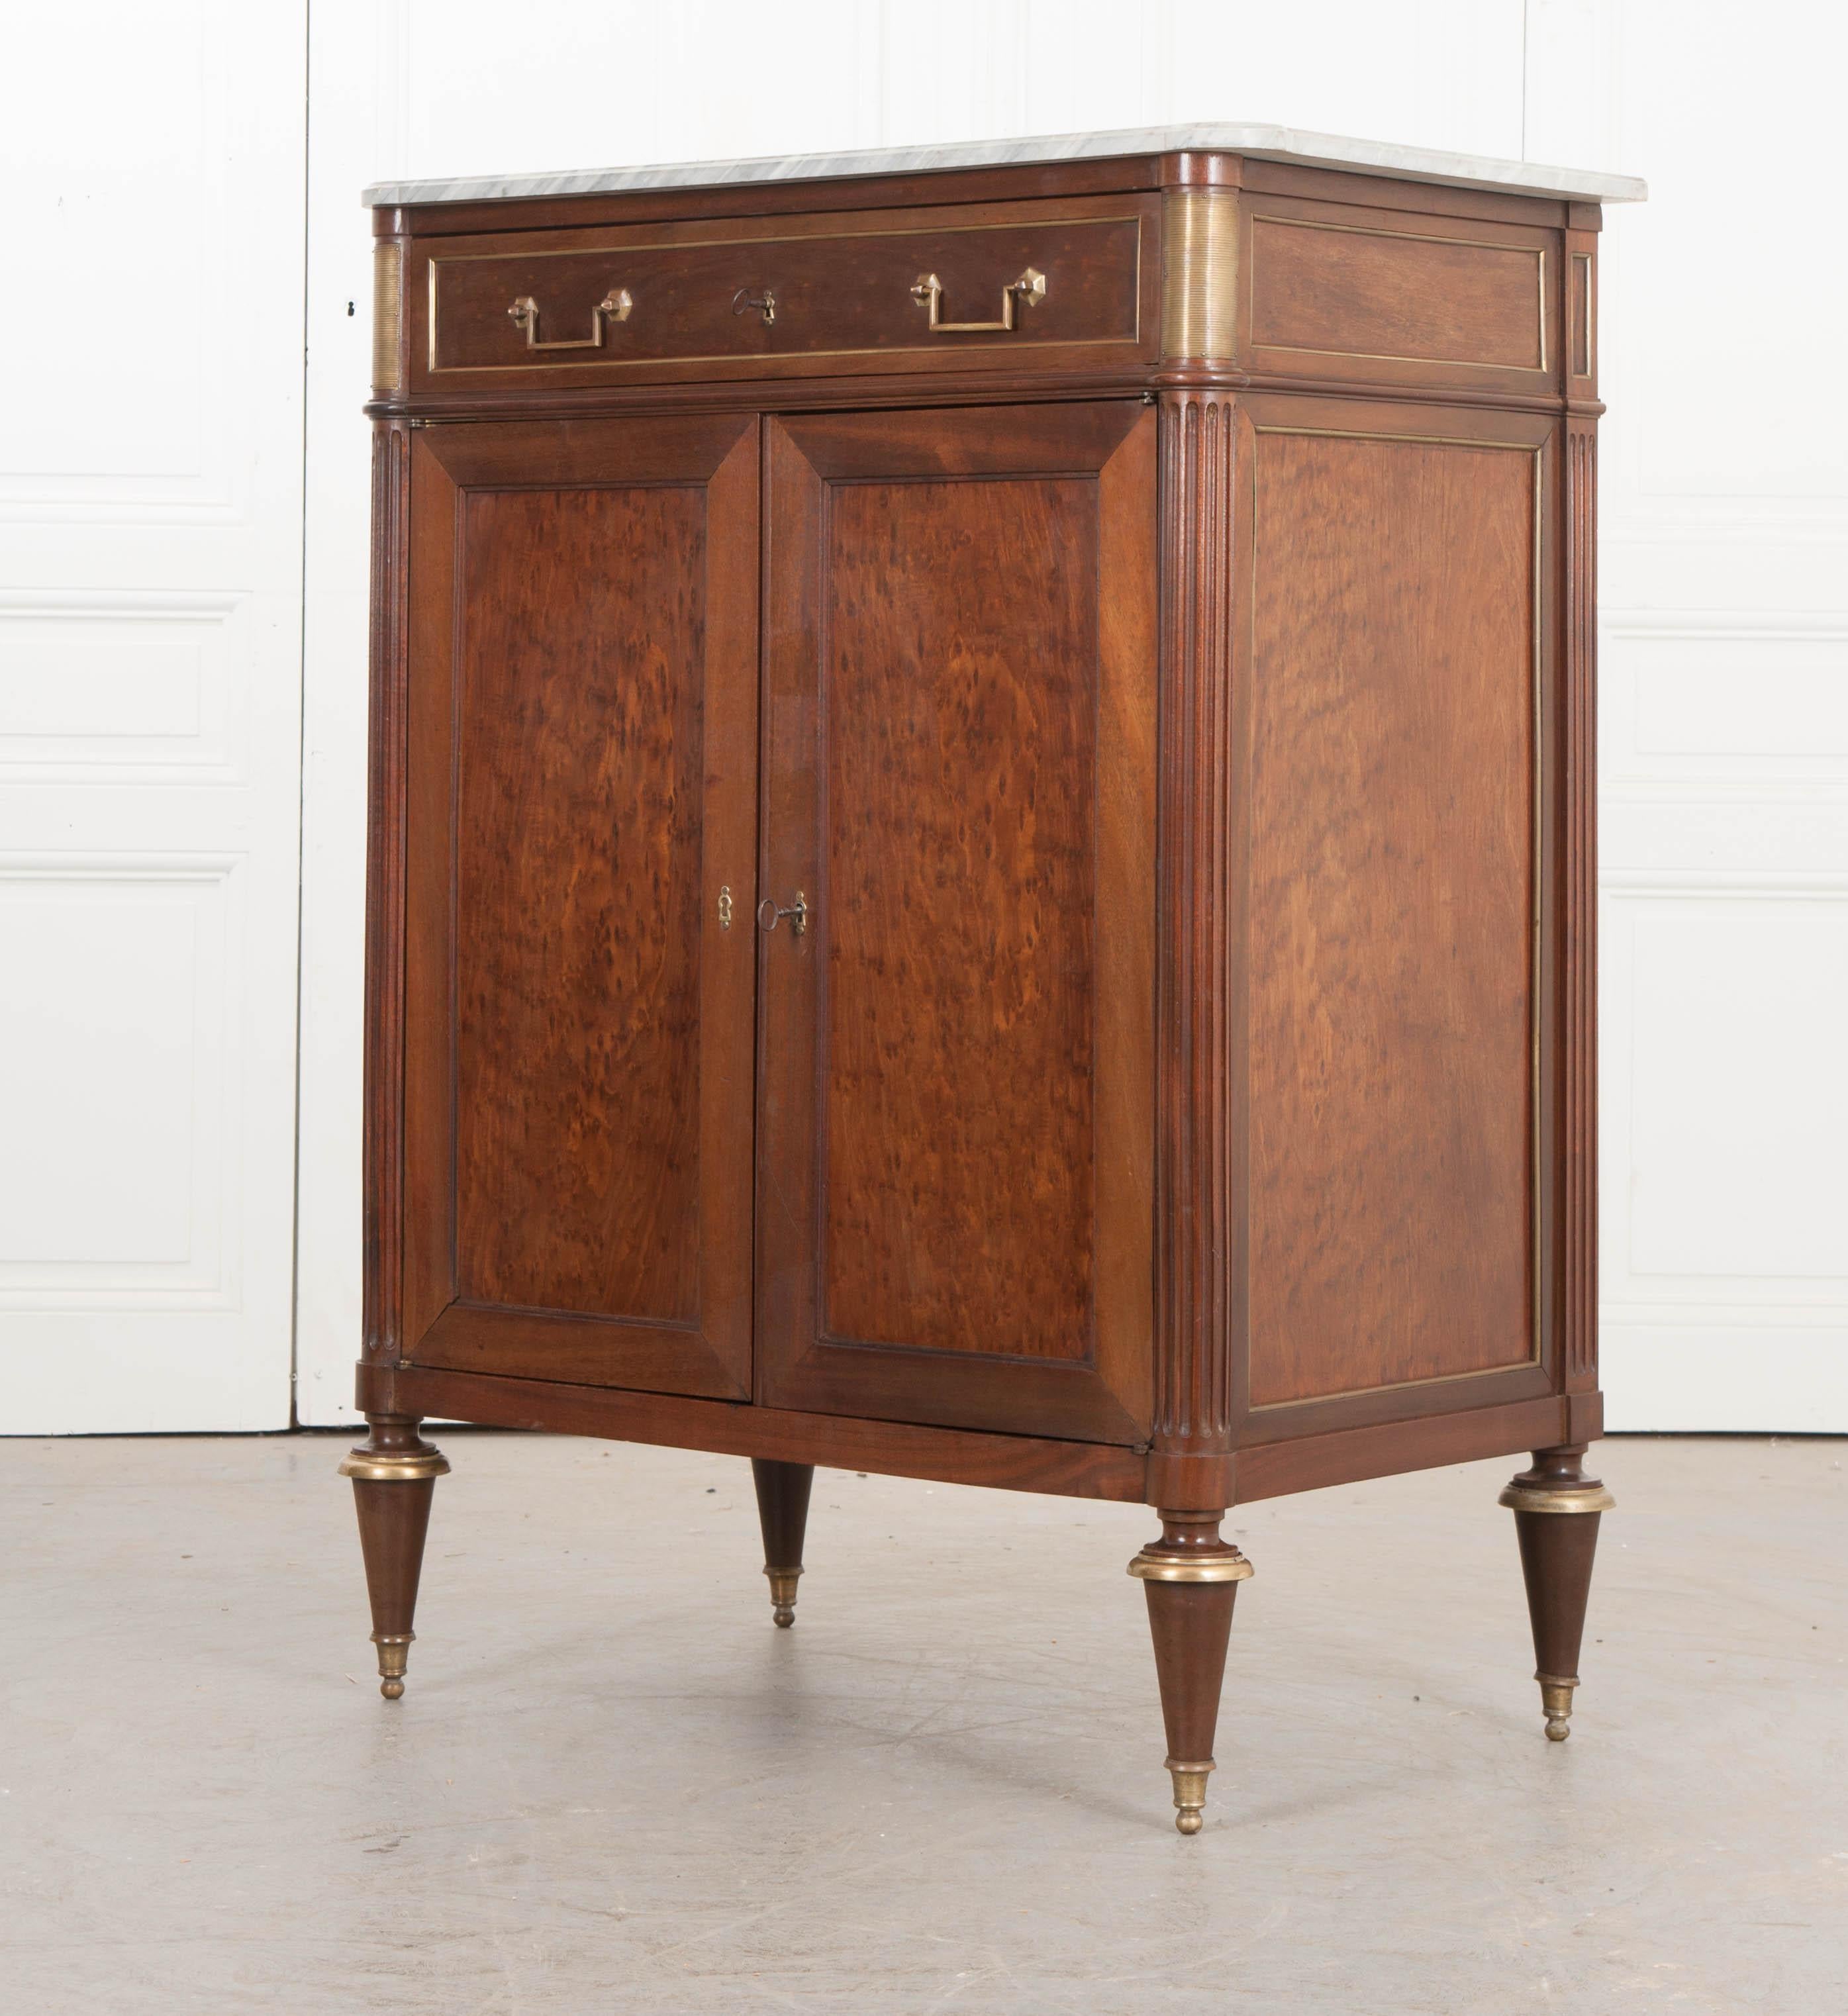 This lovely French Louis XVI-style marble-top bird’s-eye mahogany tall cabinet, circa 1940s, from France, has a beautiful pale-grey and white marble top with turreted corners, over a conforming case with a single paneled long apron drawer trimmed in